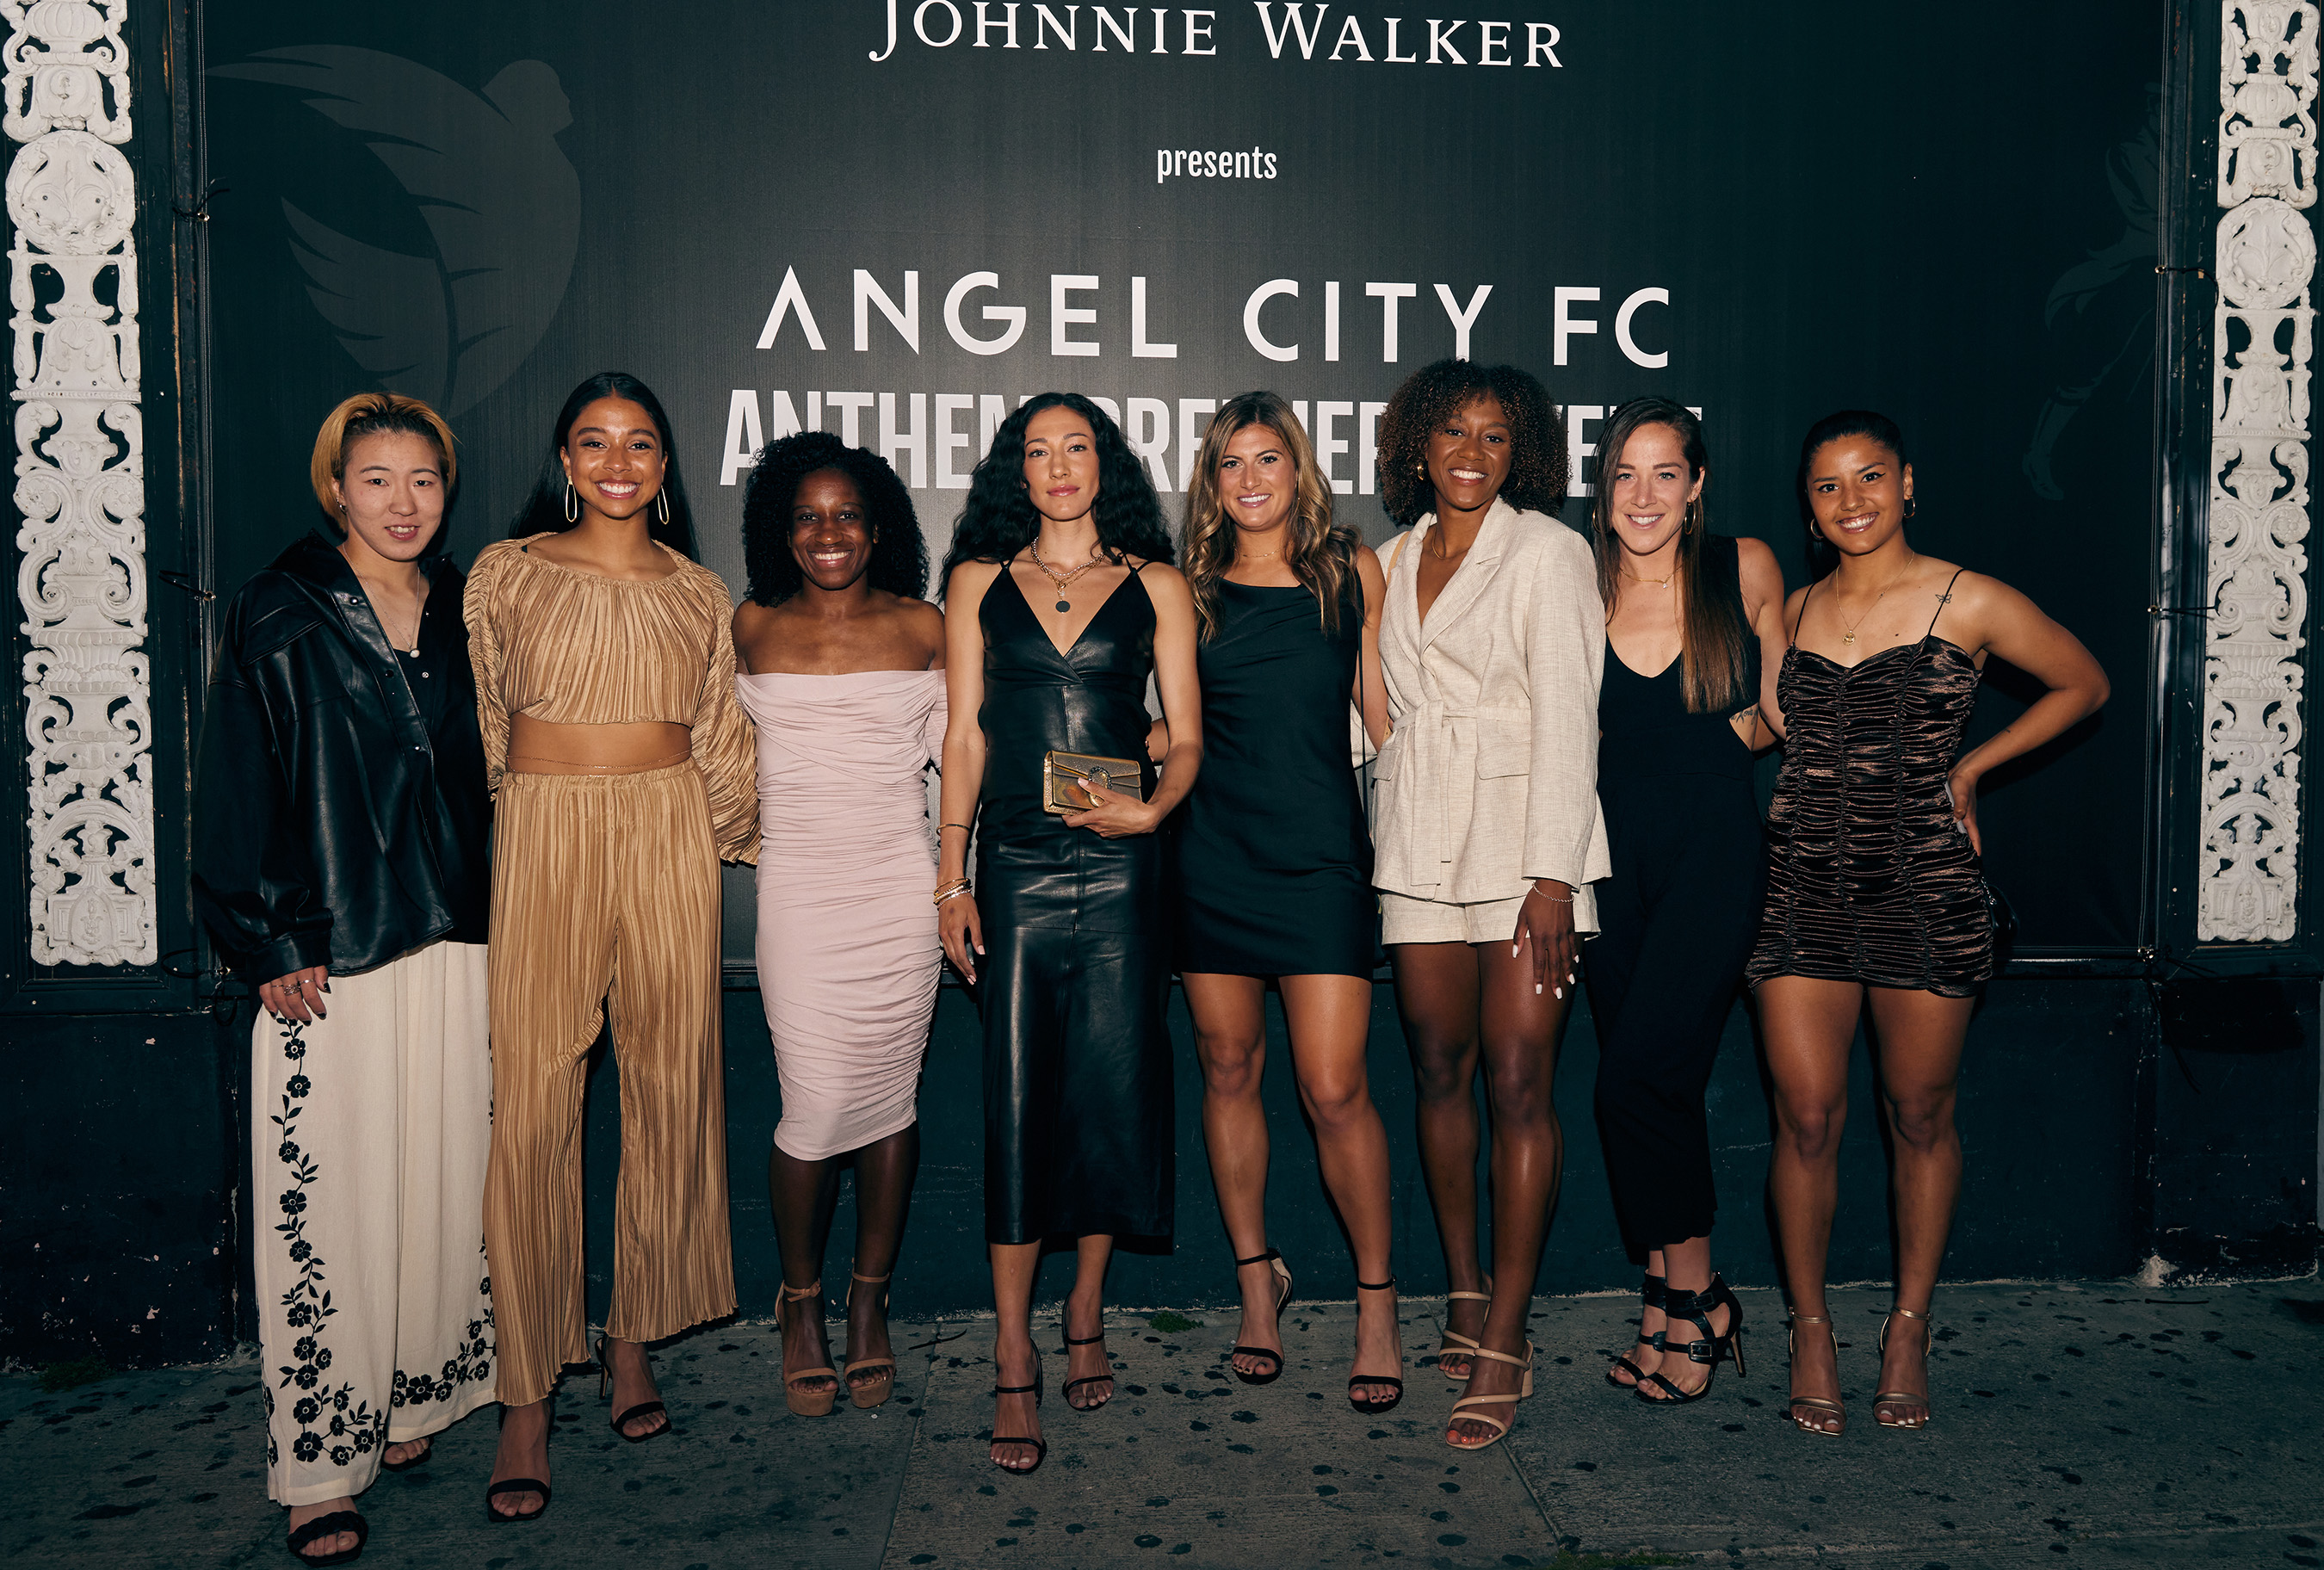 Members of the Angel City FC Team Celebrate Johnnie Walker’s New First Strides Initiative at Their Anthem Launch Event.